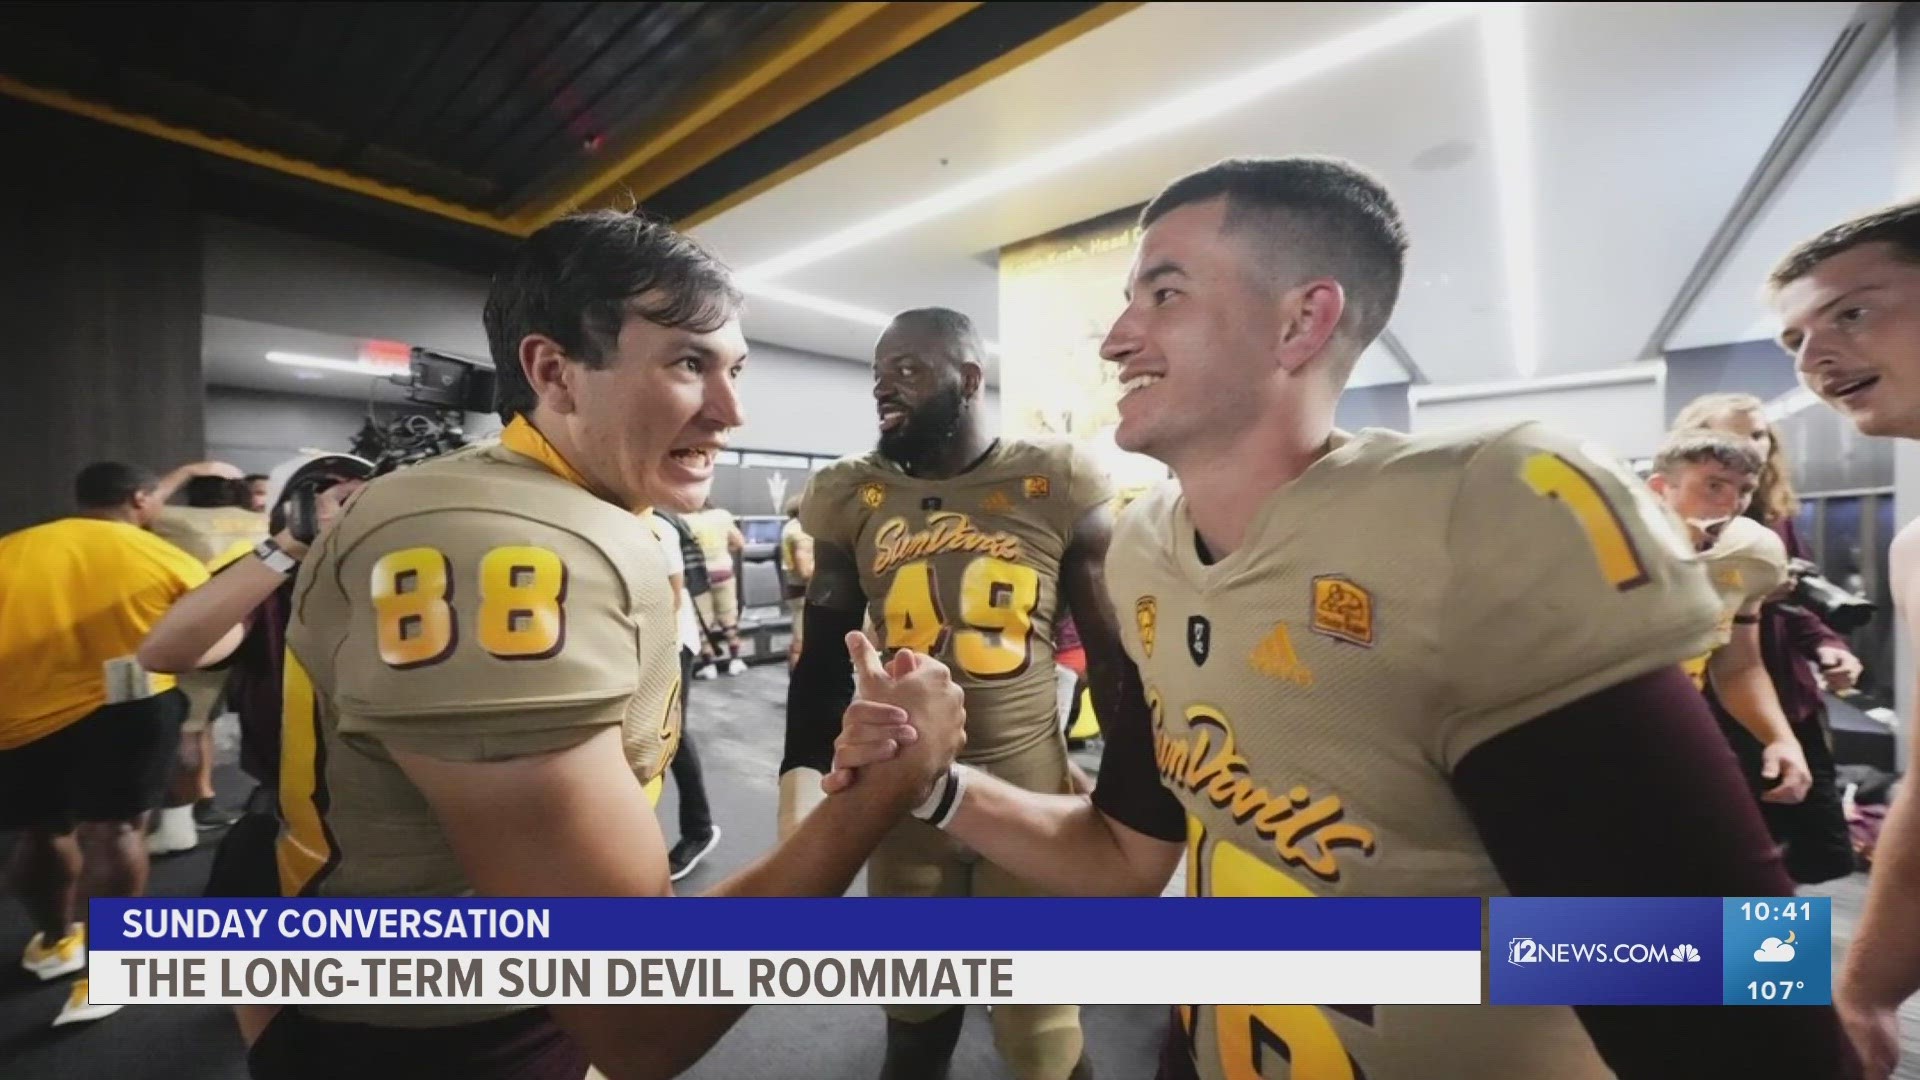 Bourguet is the clear leader in the locker room. He’s also use to competition and having to prove himself. He came to ASU as a walk-on in 2019.